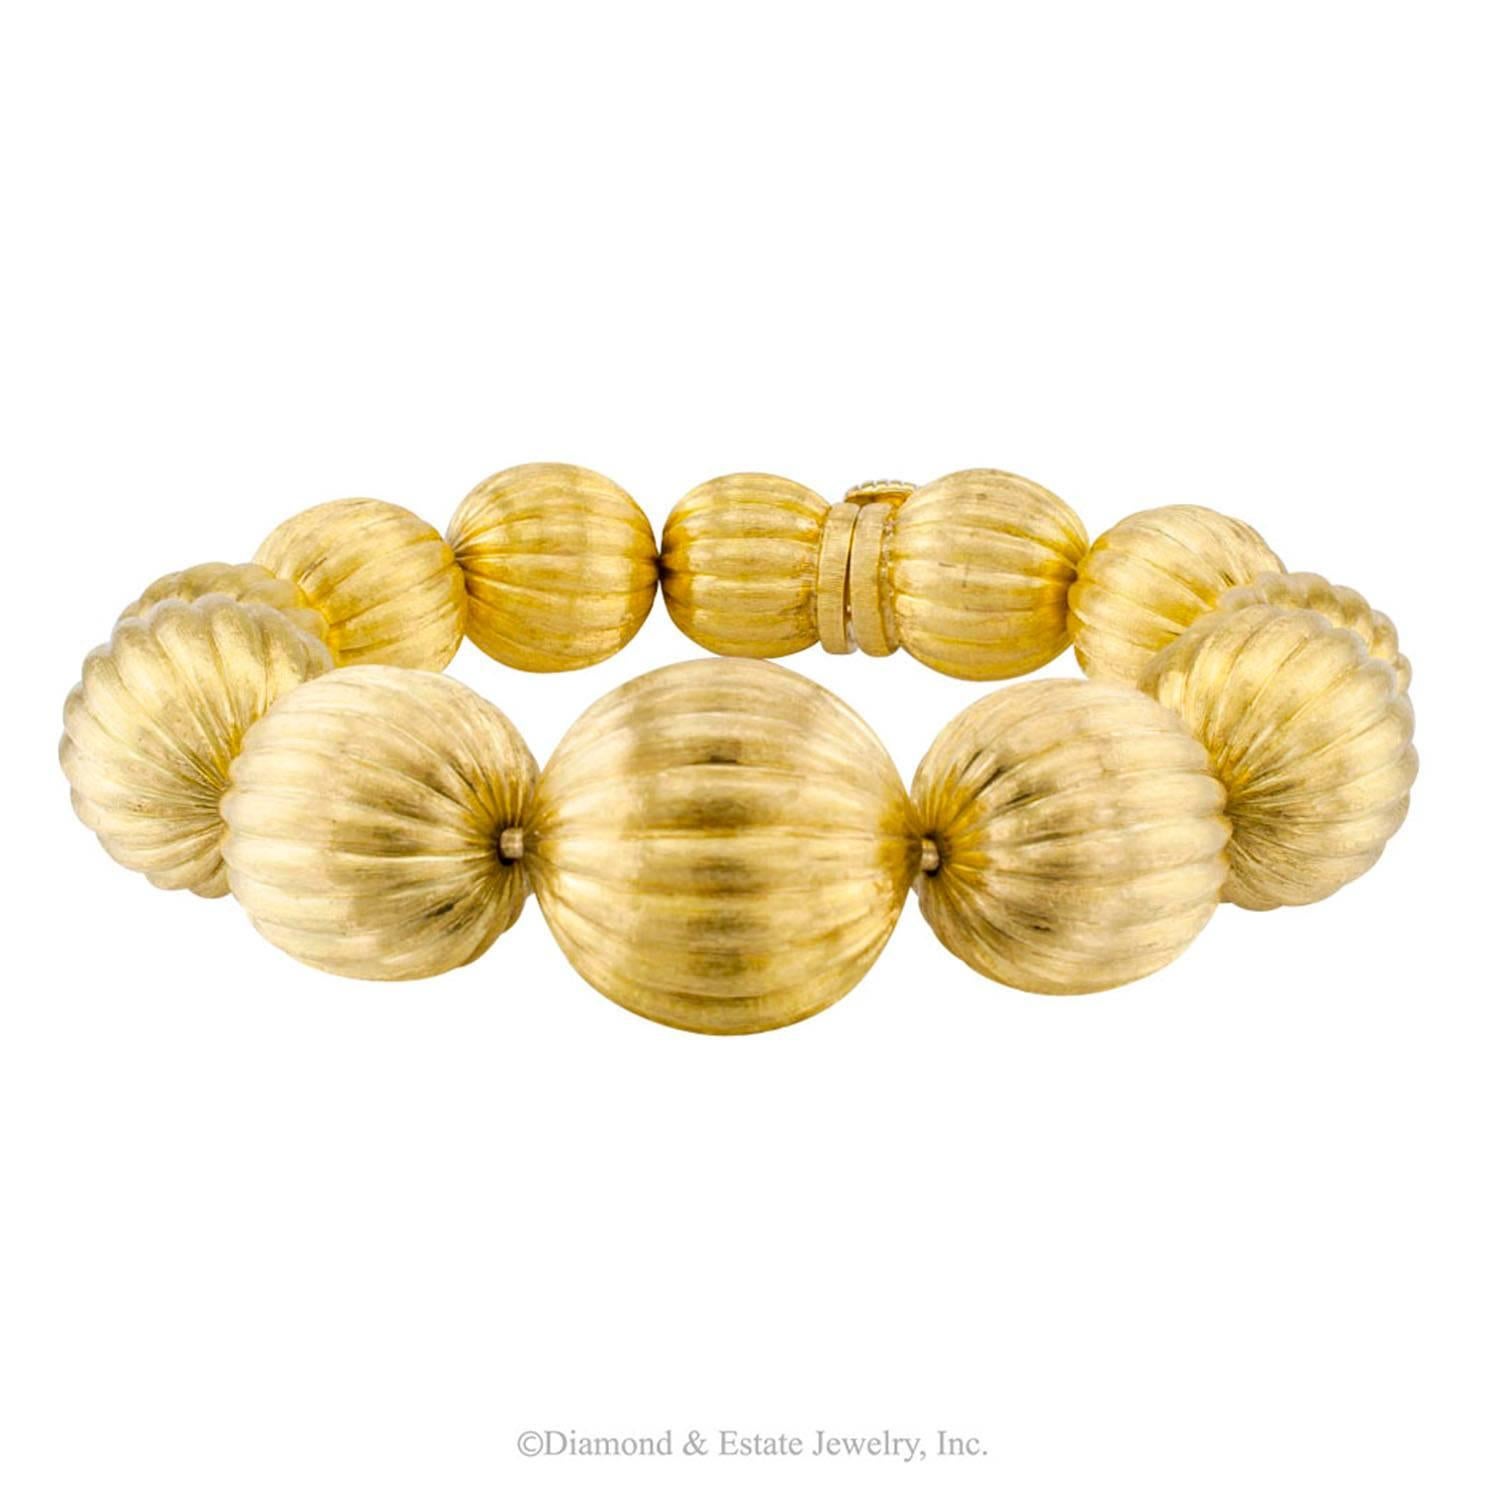 1970s Gold Bead Bracelet

1970s 18-karat gold bead bracelet.  The design features a course of twelve graduating 18-karat yellow gold beads decorated with melon-fluting and a Florentine finish that lends the orbs a glowing characteristic, as if they